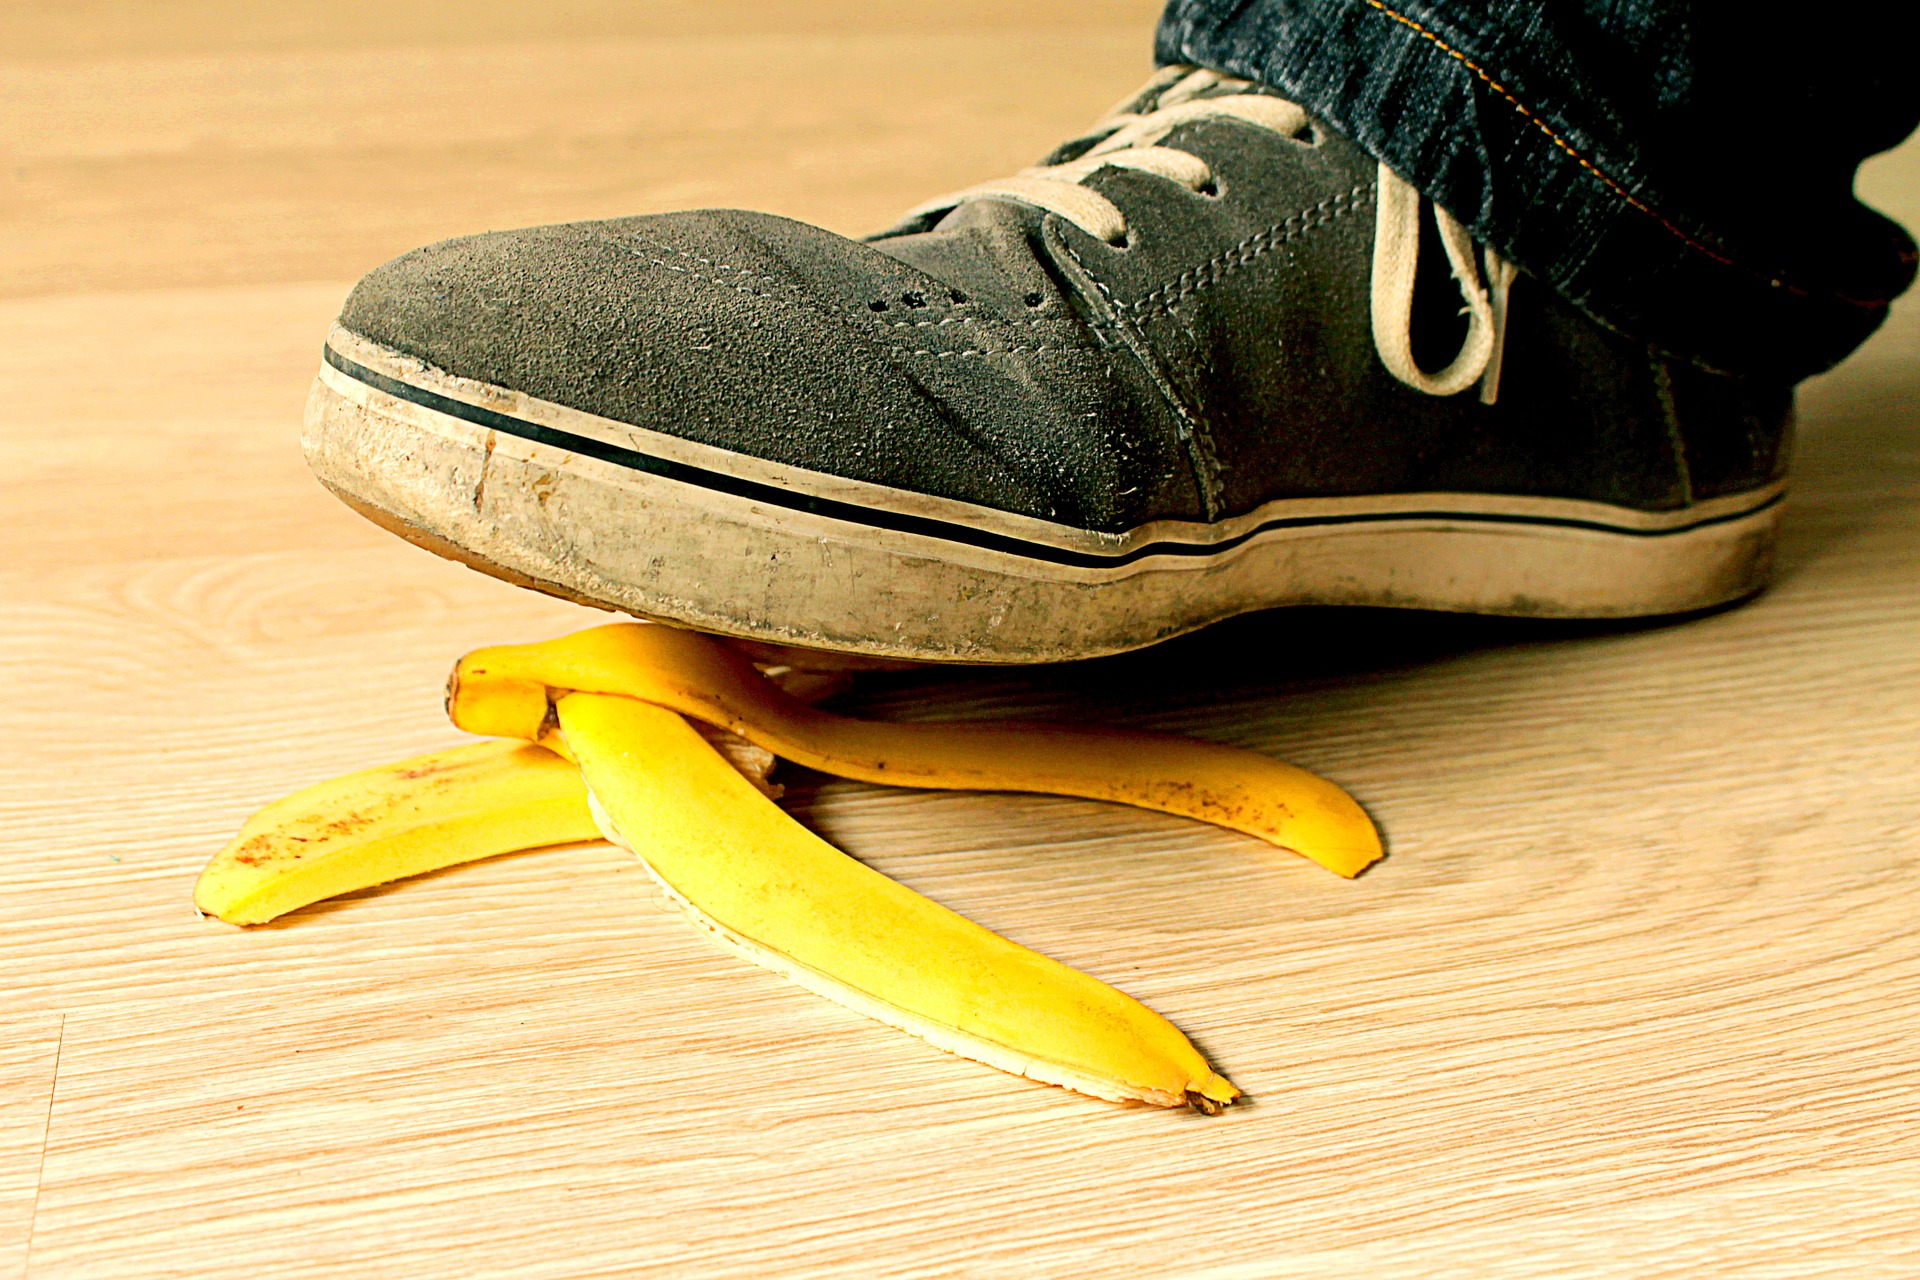 Slip and Fall Accidents: When a Banana Peel Can Cost Big Bucks